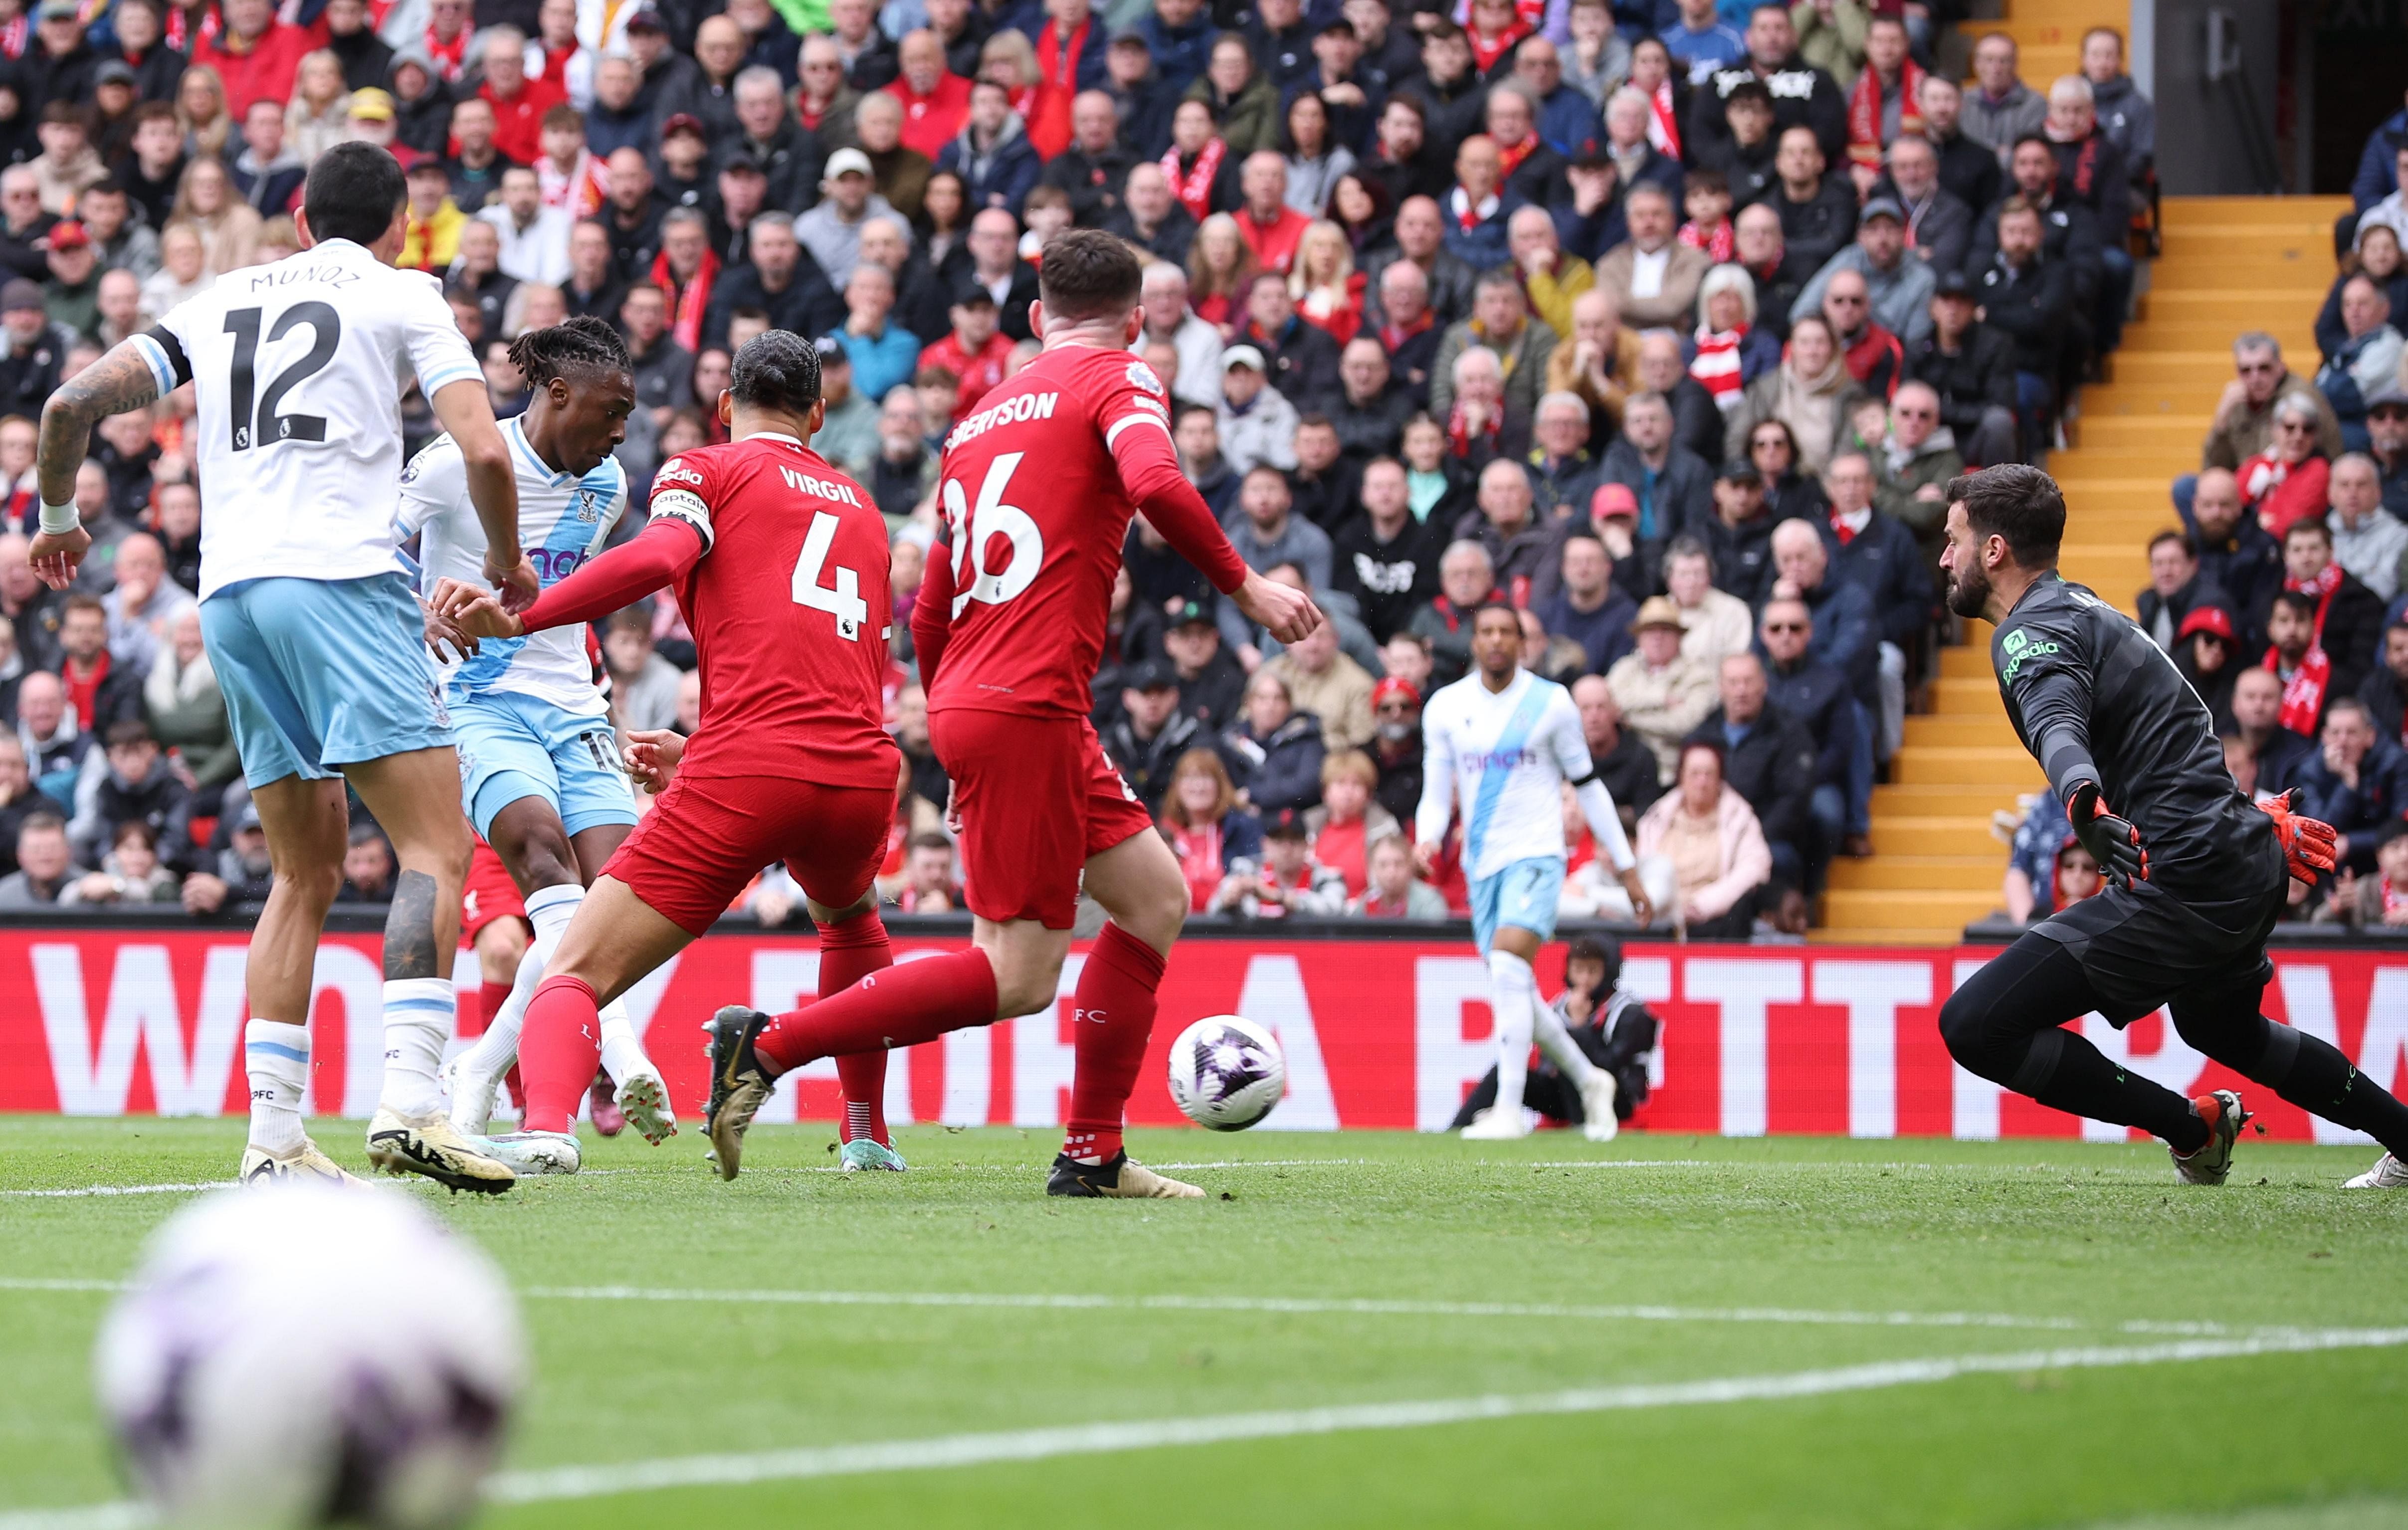 Eberechi Eze and Crystal Palace deal Liverpool big blow to title chances with 1-0 victory